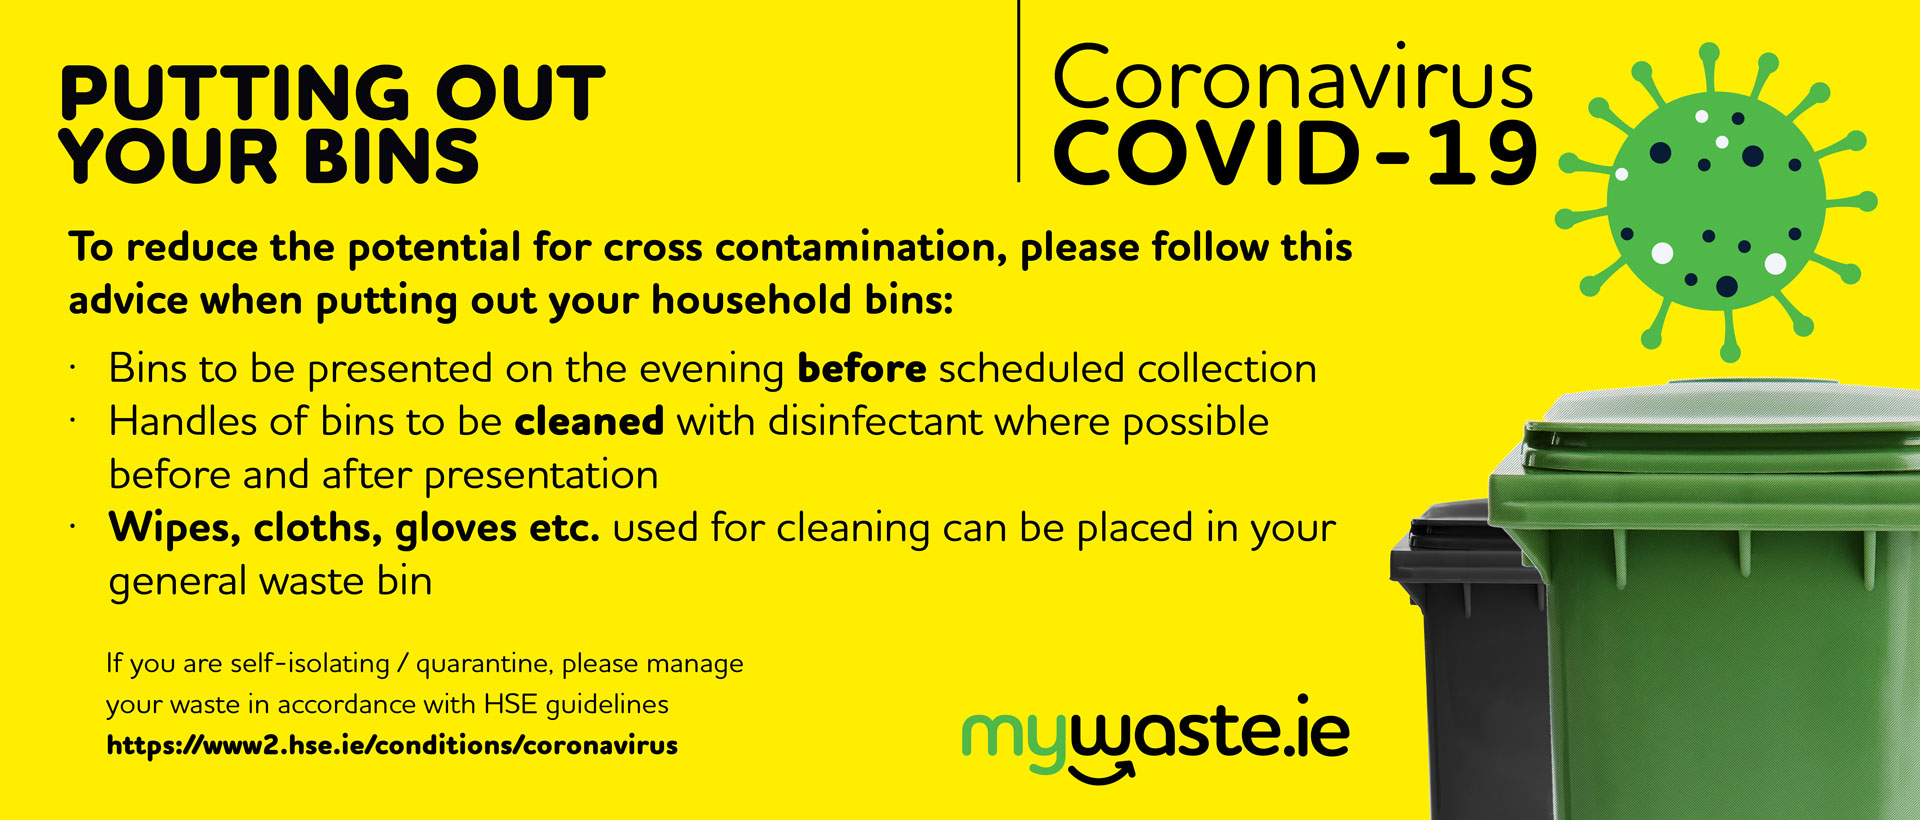 instructions for putting out bins in relation to Coronavirus COVID-19